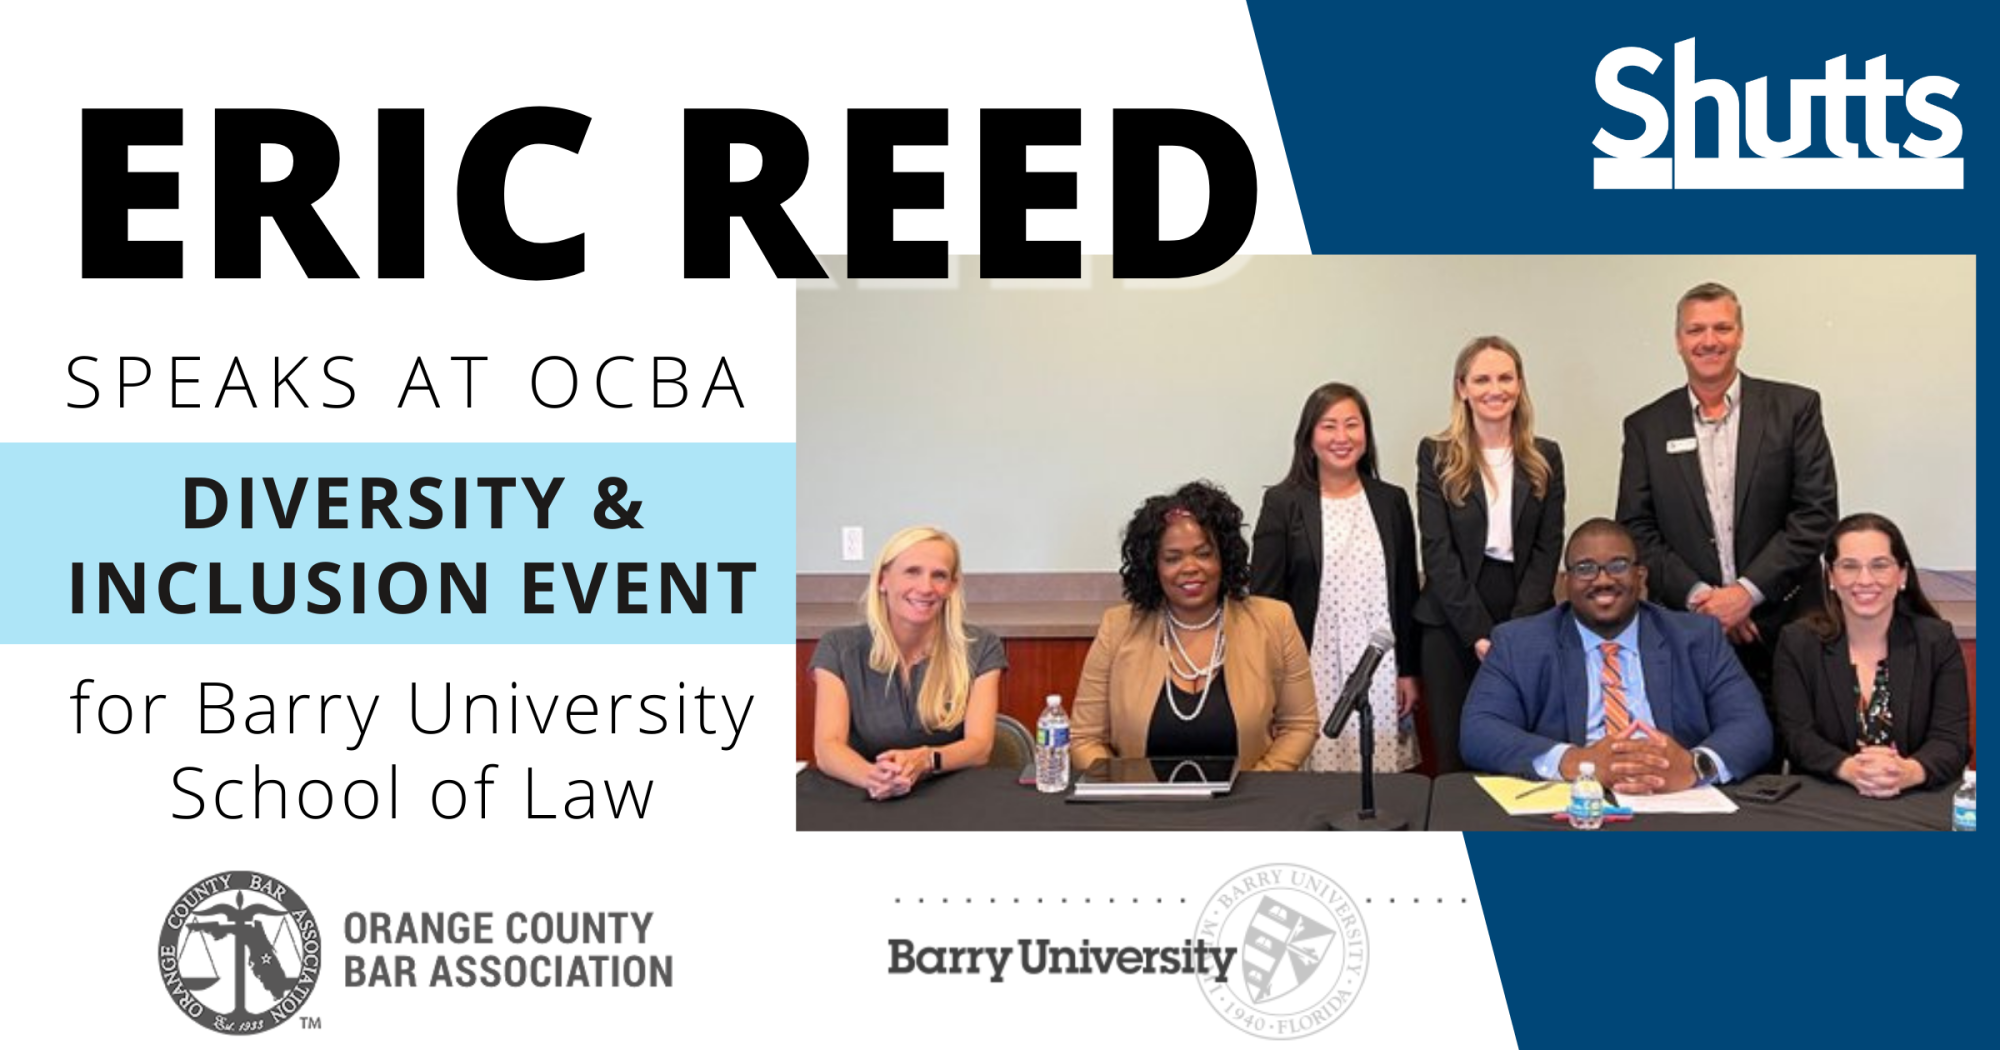 Eric Reed Speaks at OCBA Diversity & Inclusion Event for Barry University School of Law